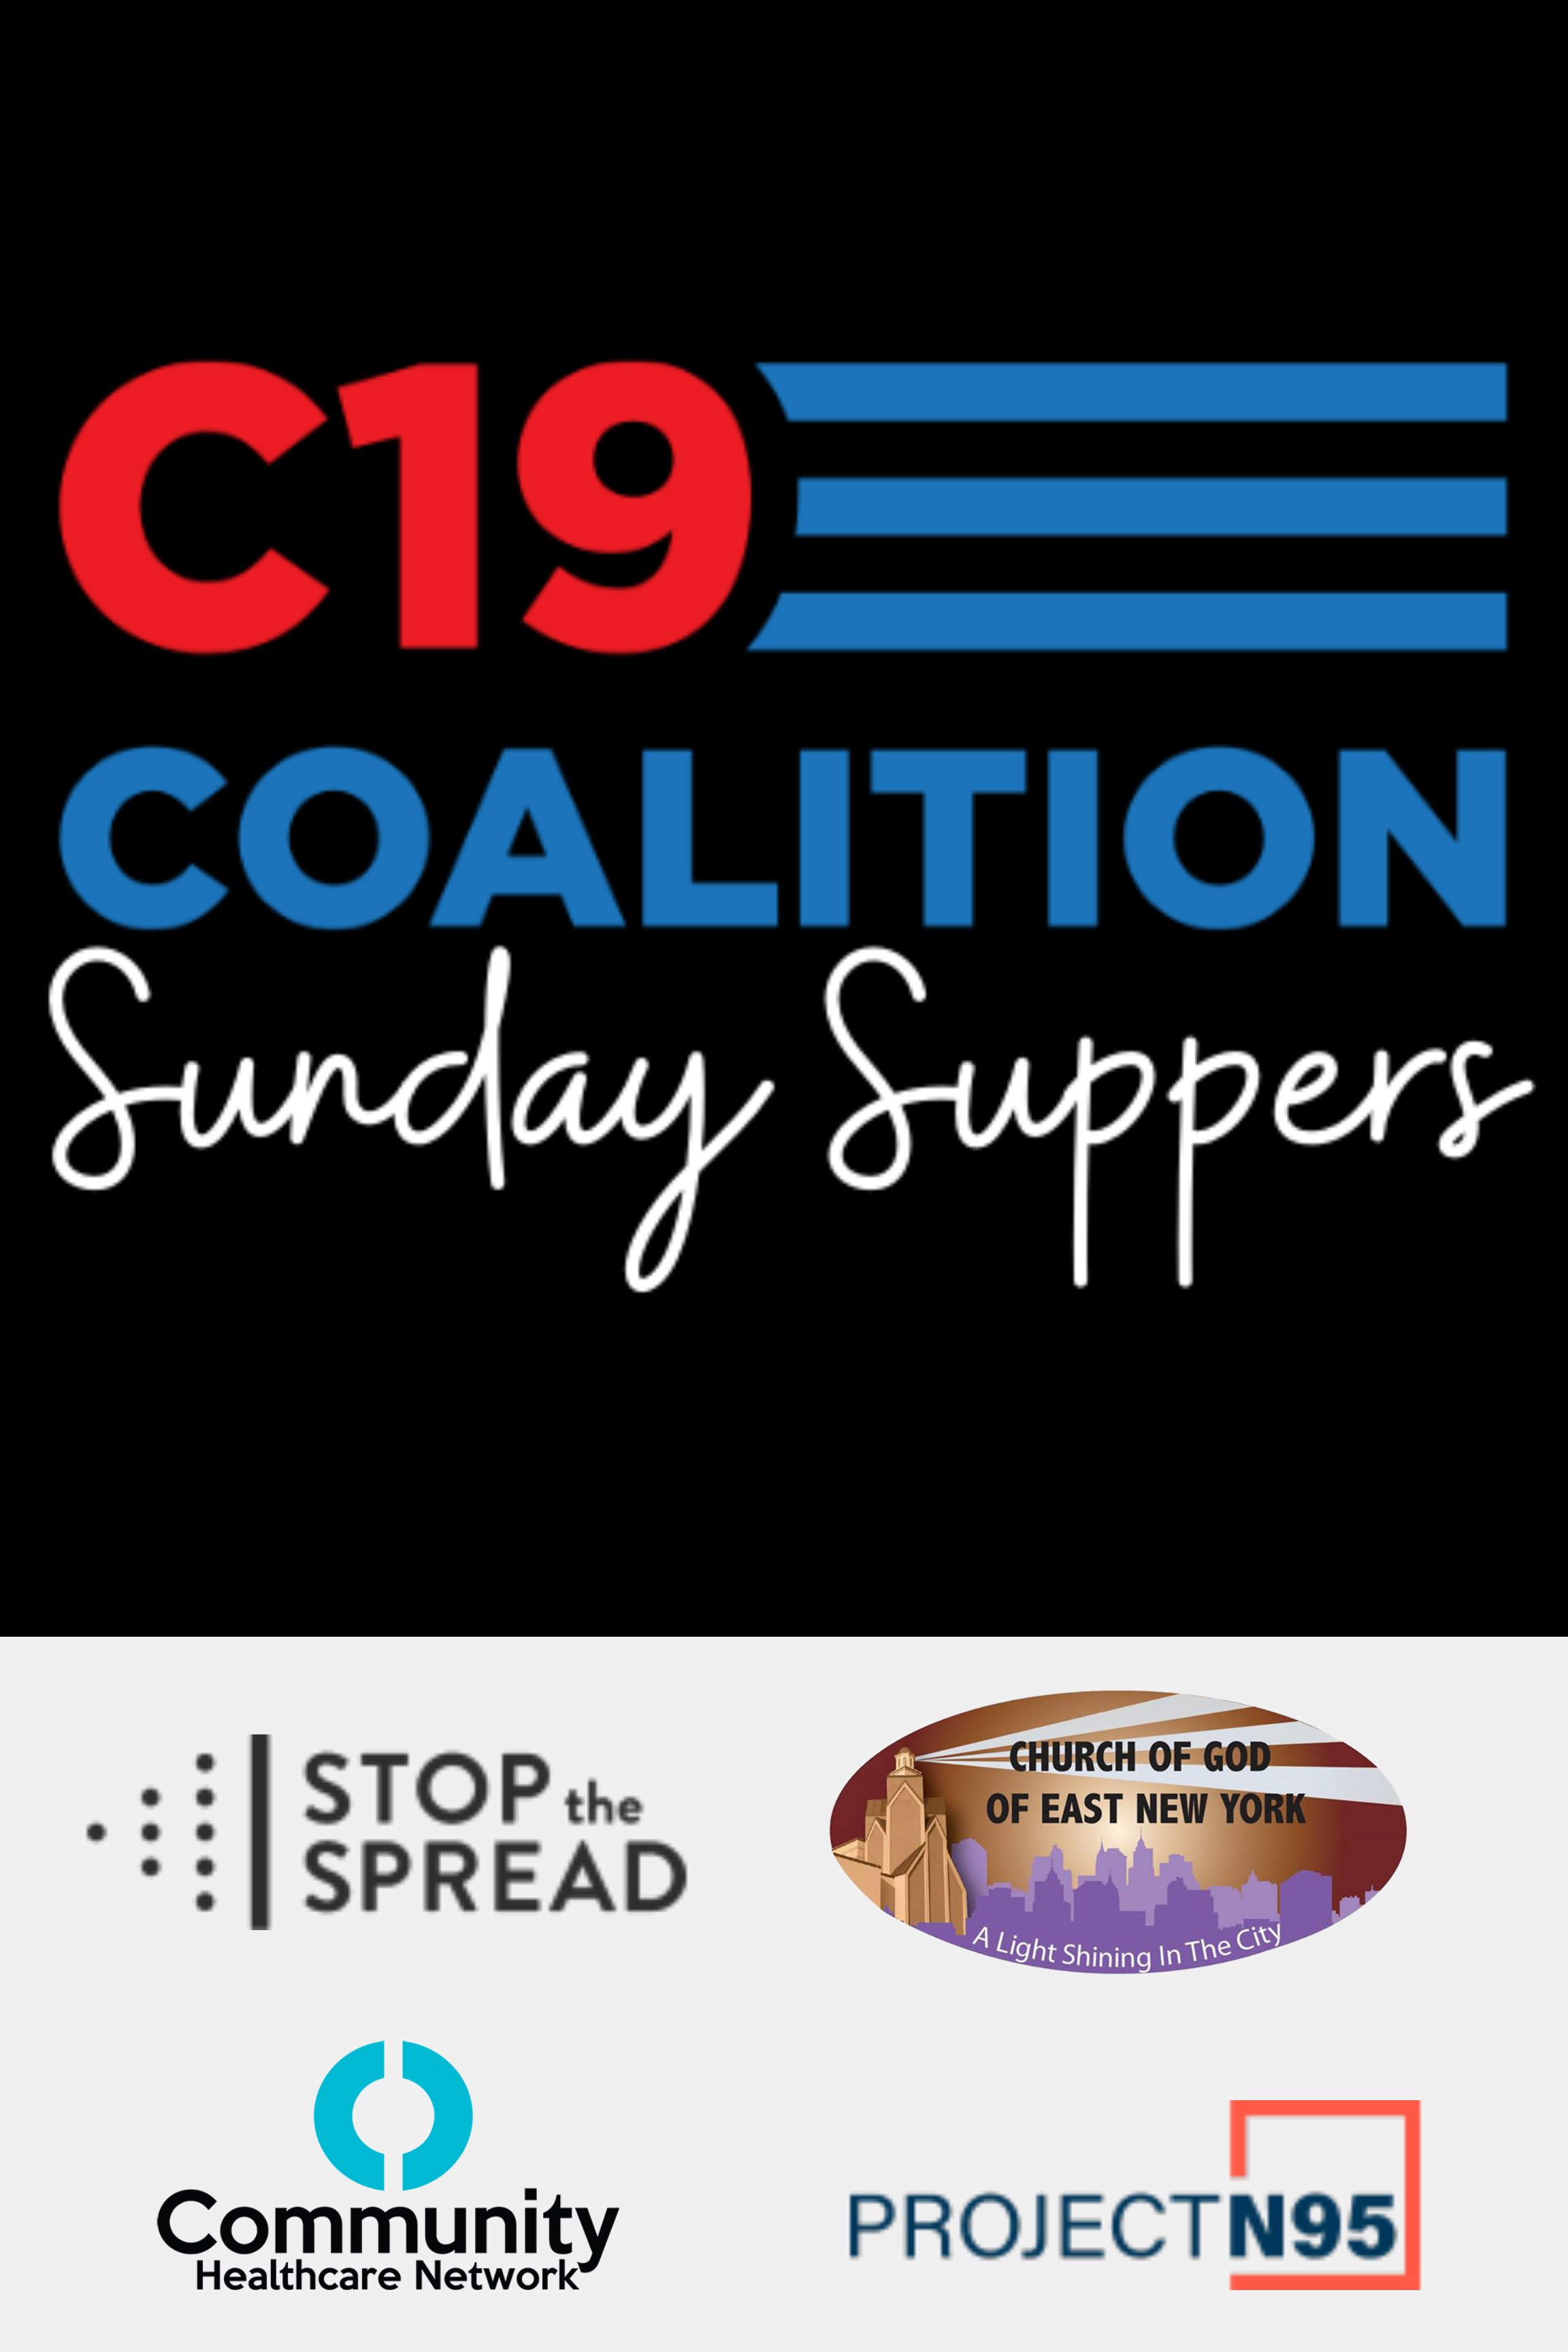 C19 Coalition Sunday Suppers